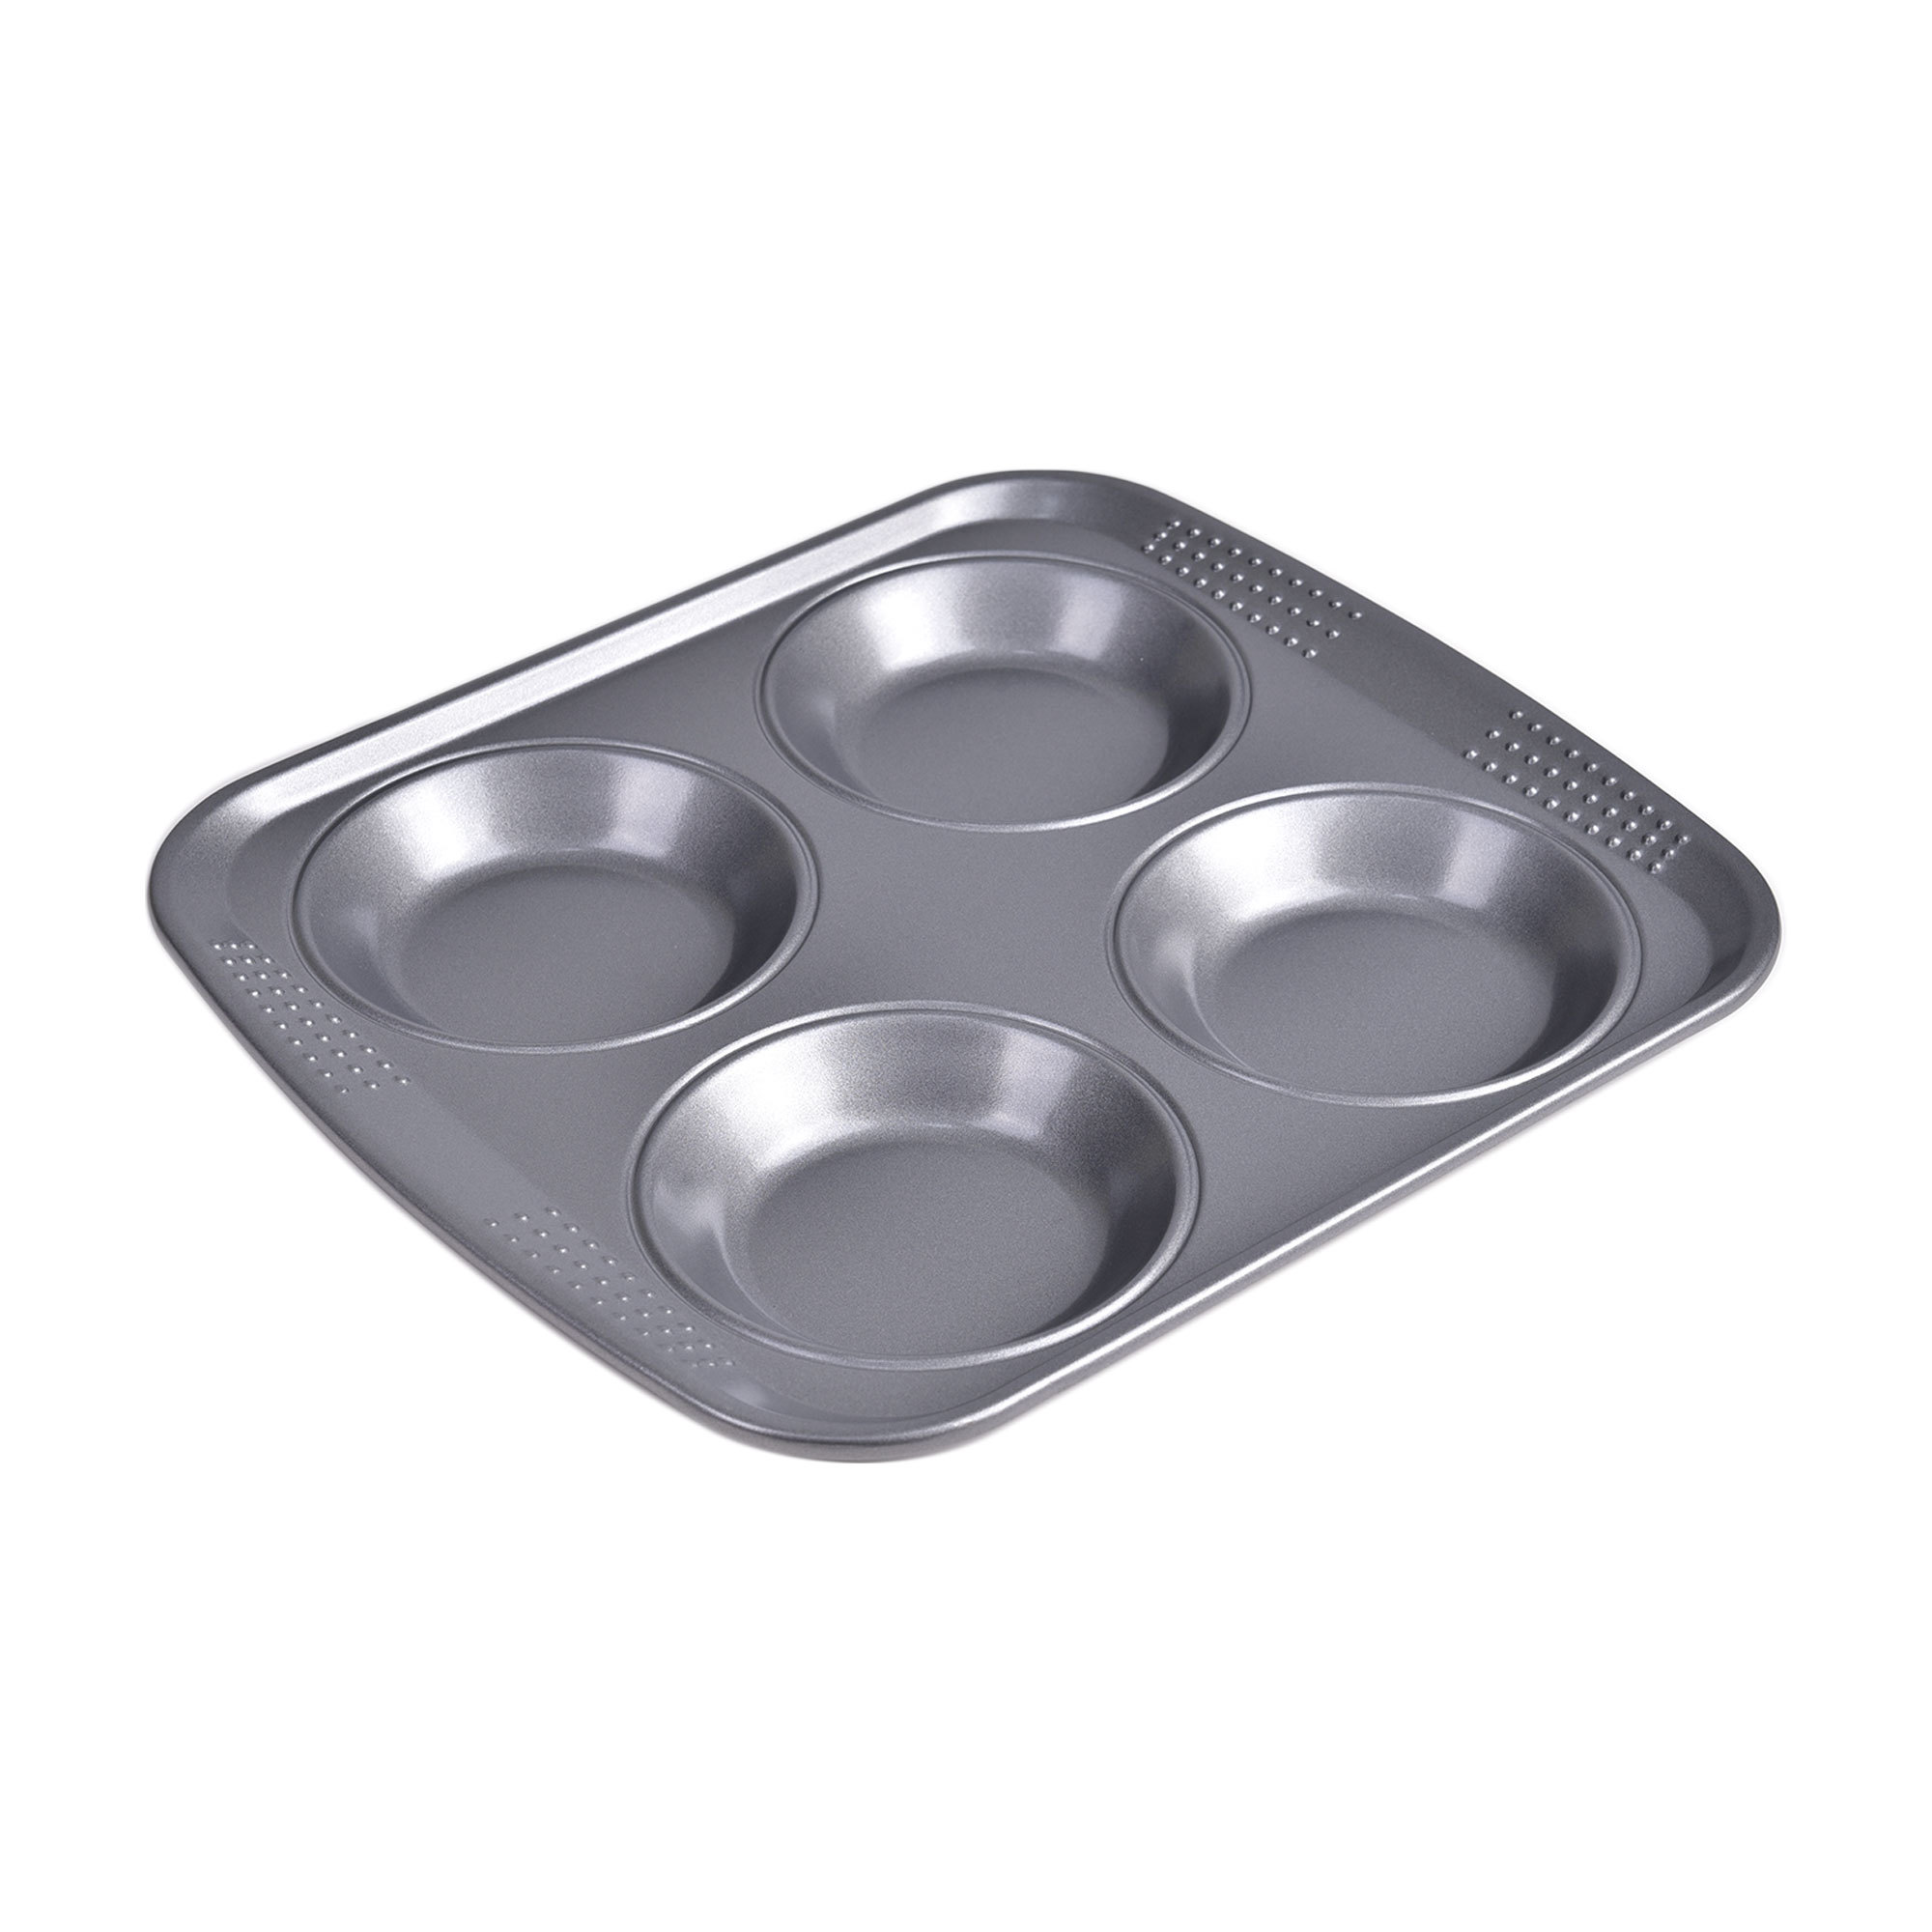 4Cup Yorkshire Pudding Pan 3235-6